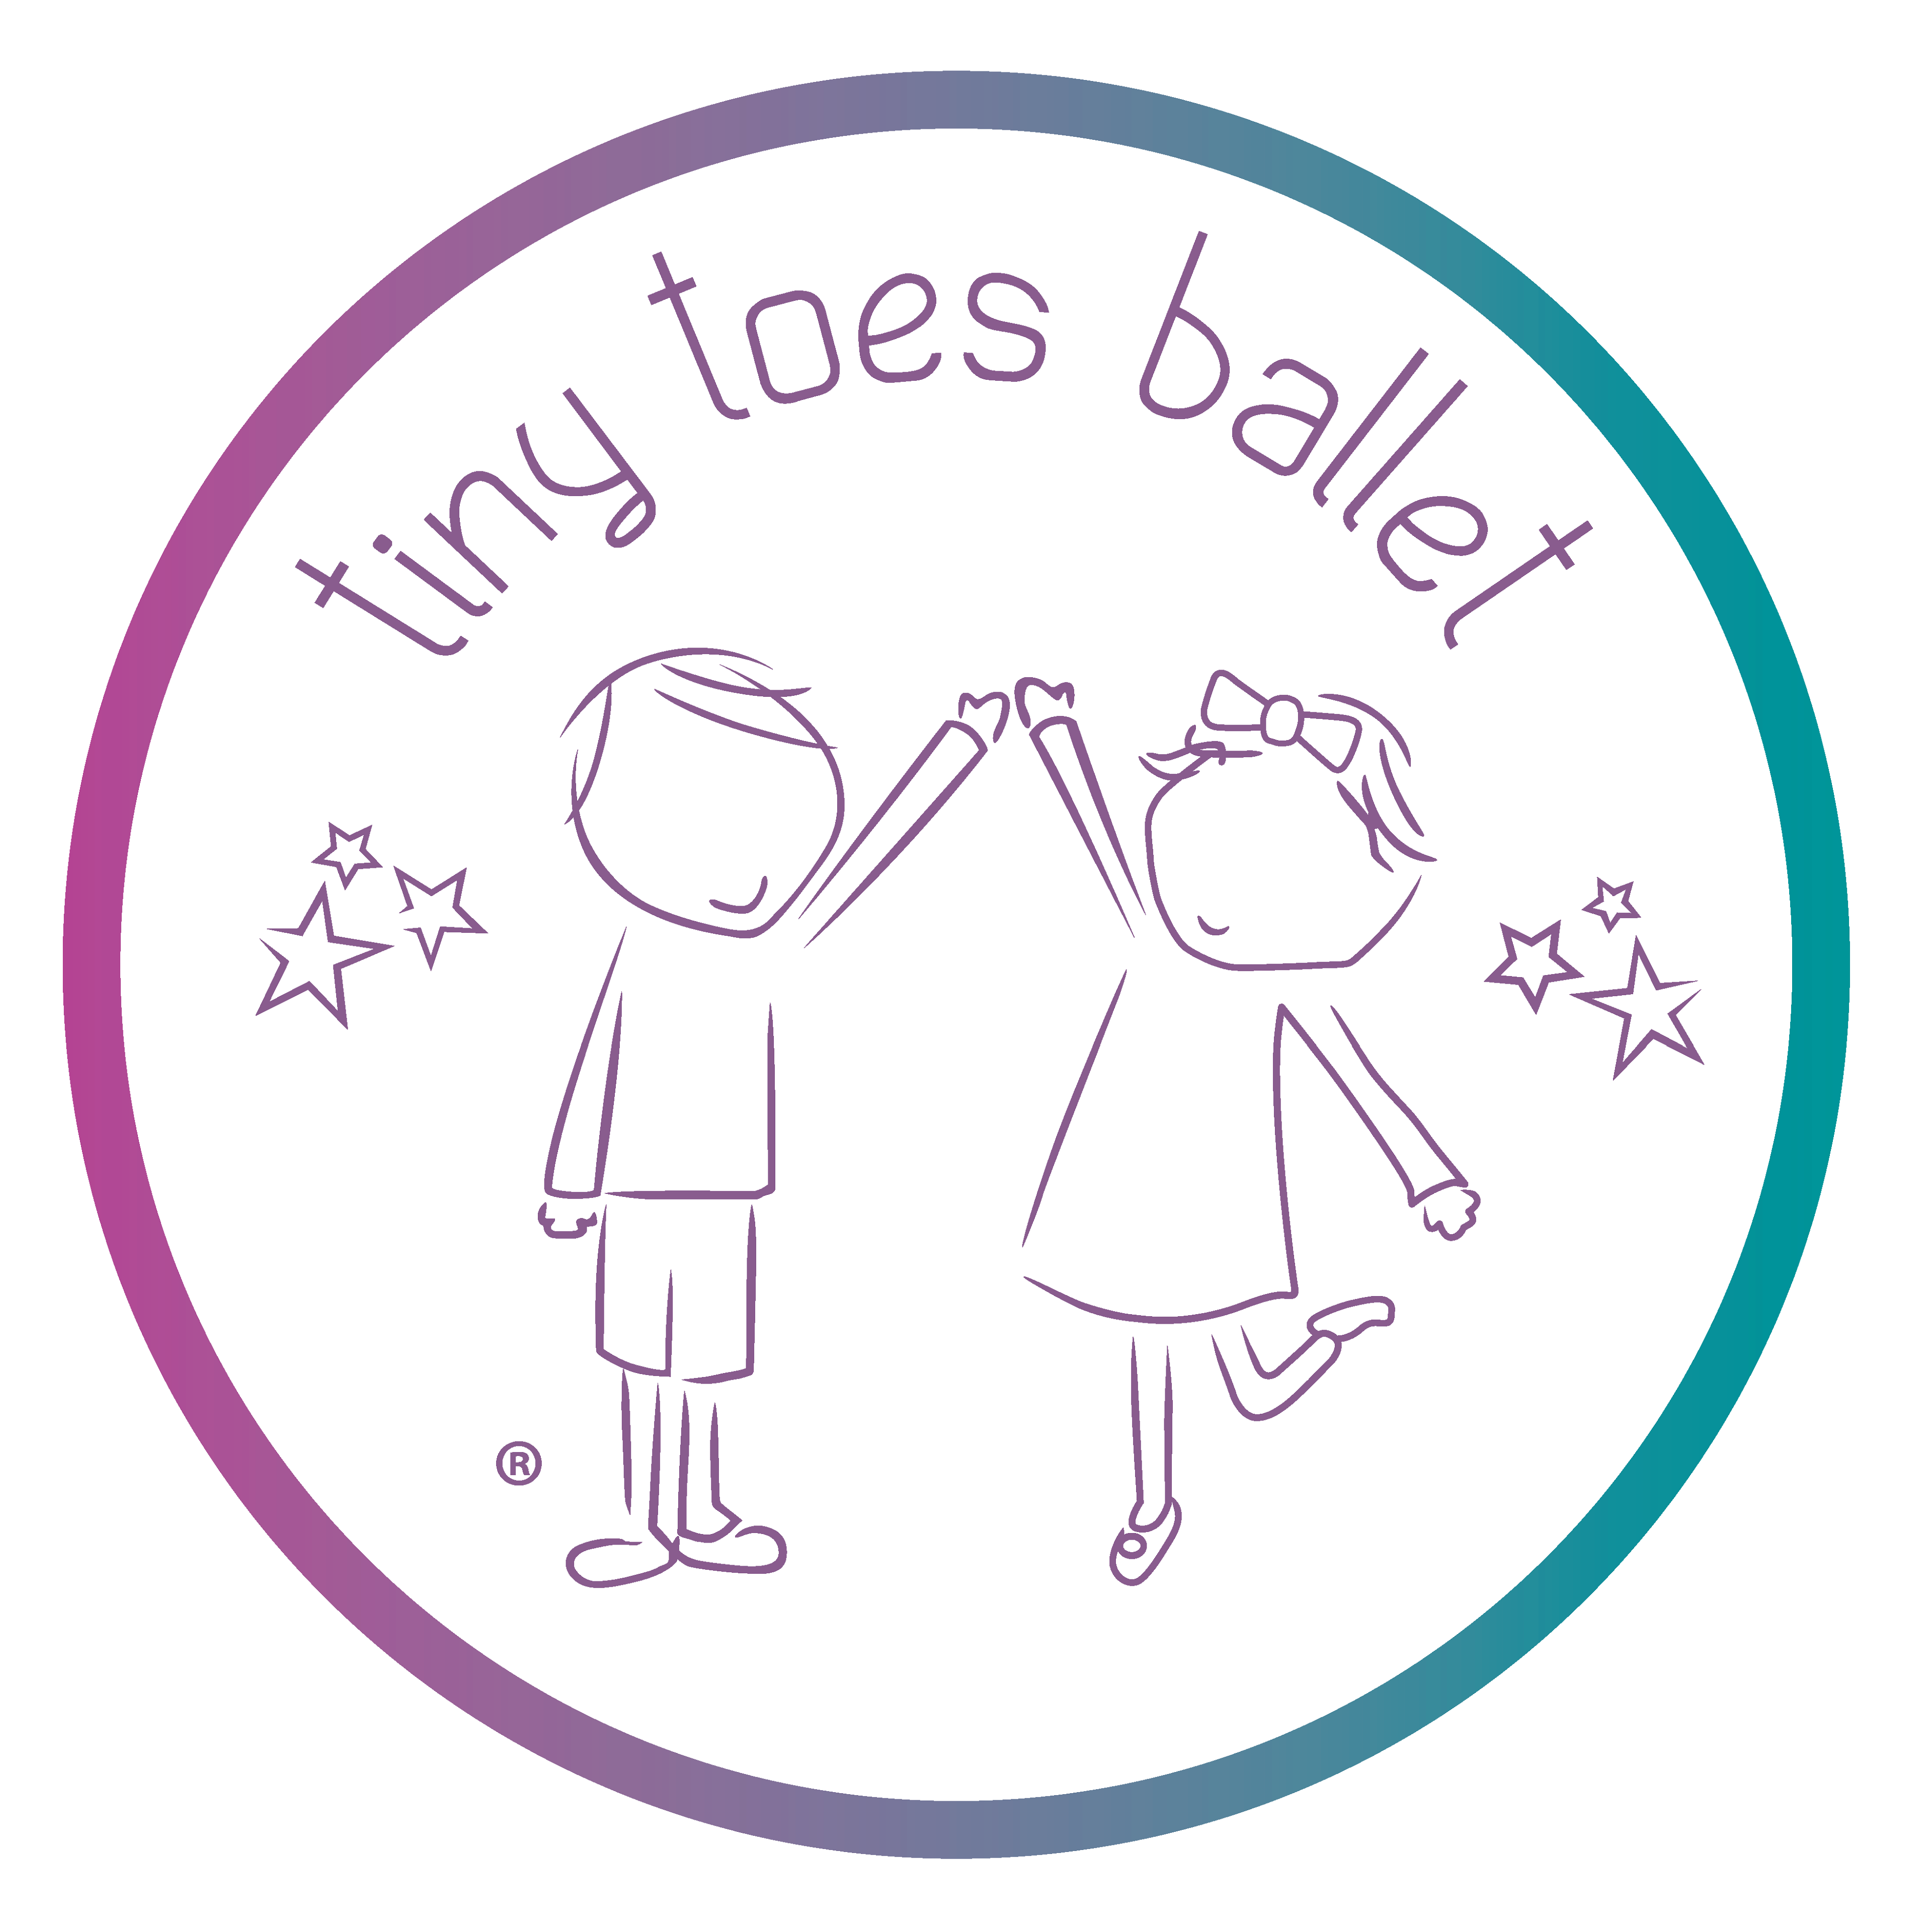 Tiny toes ballet classes in Kenfig, Porthcawl